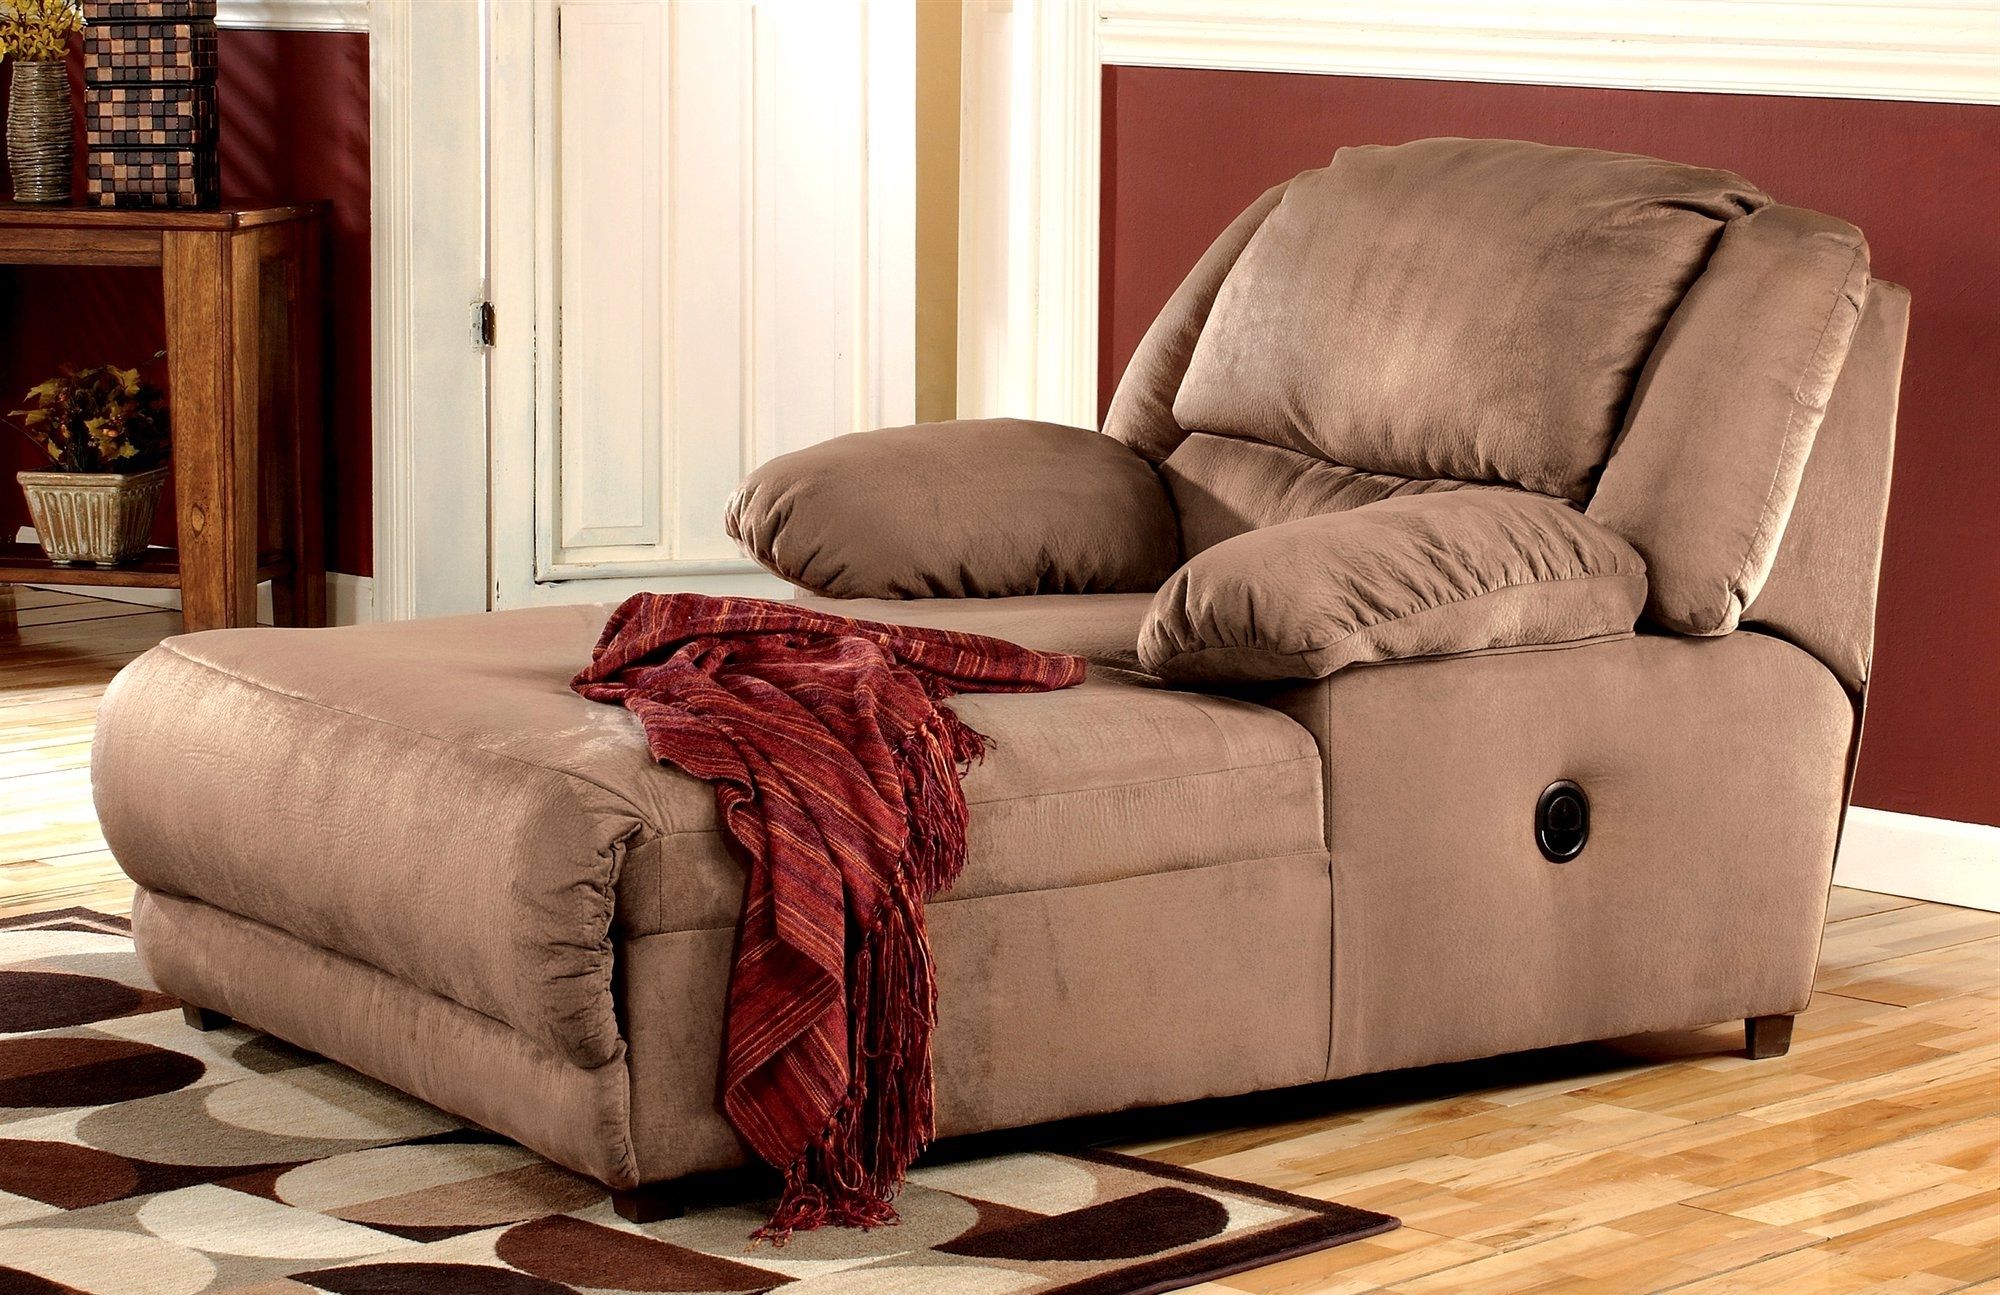 lounger sofa chair leather